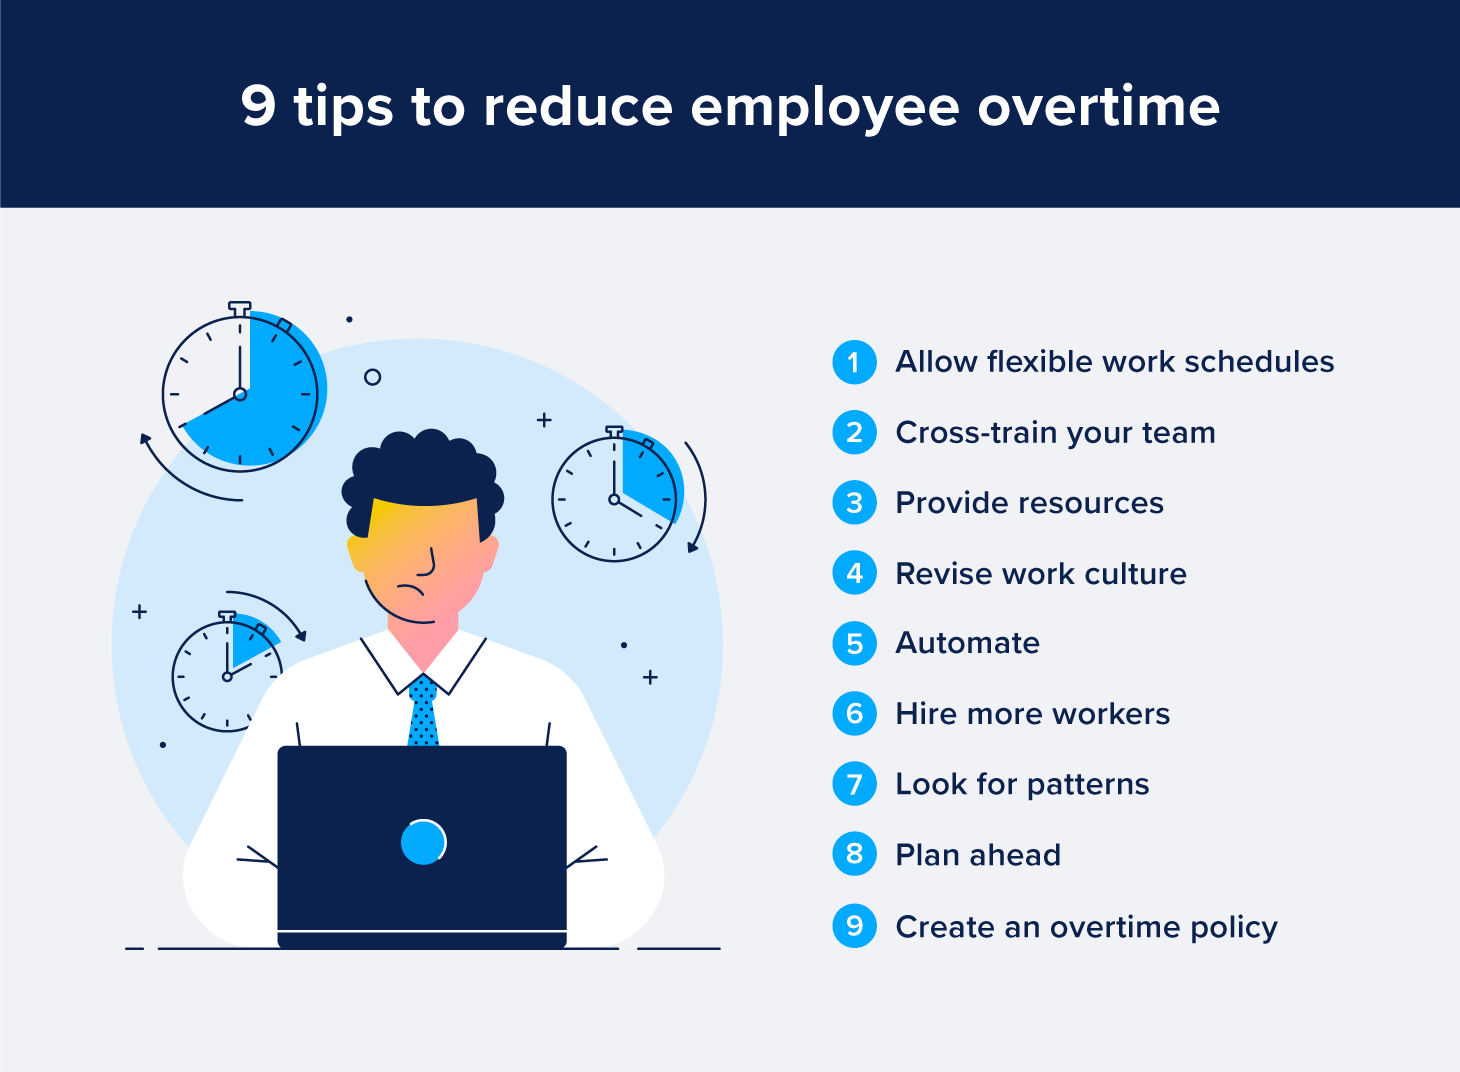 nine ways that a business can reduce employee overtime